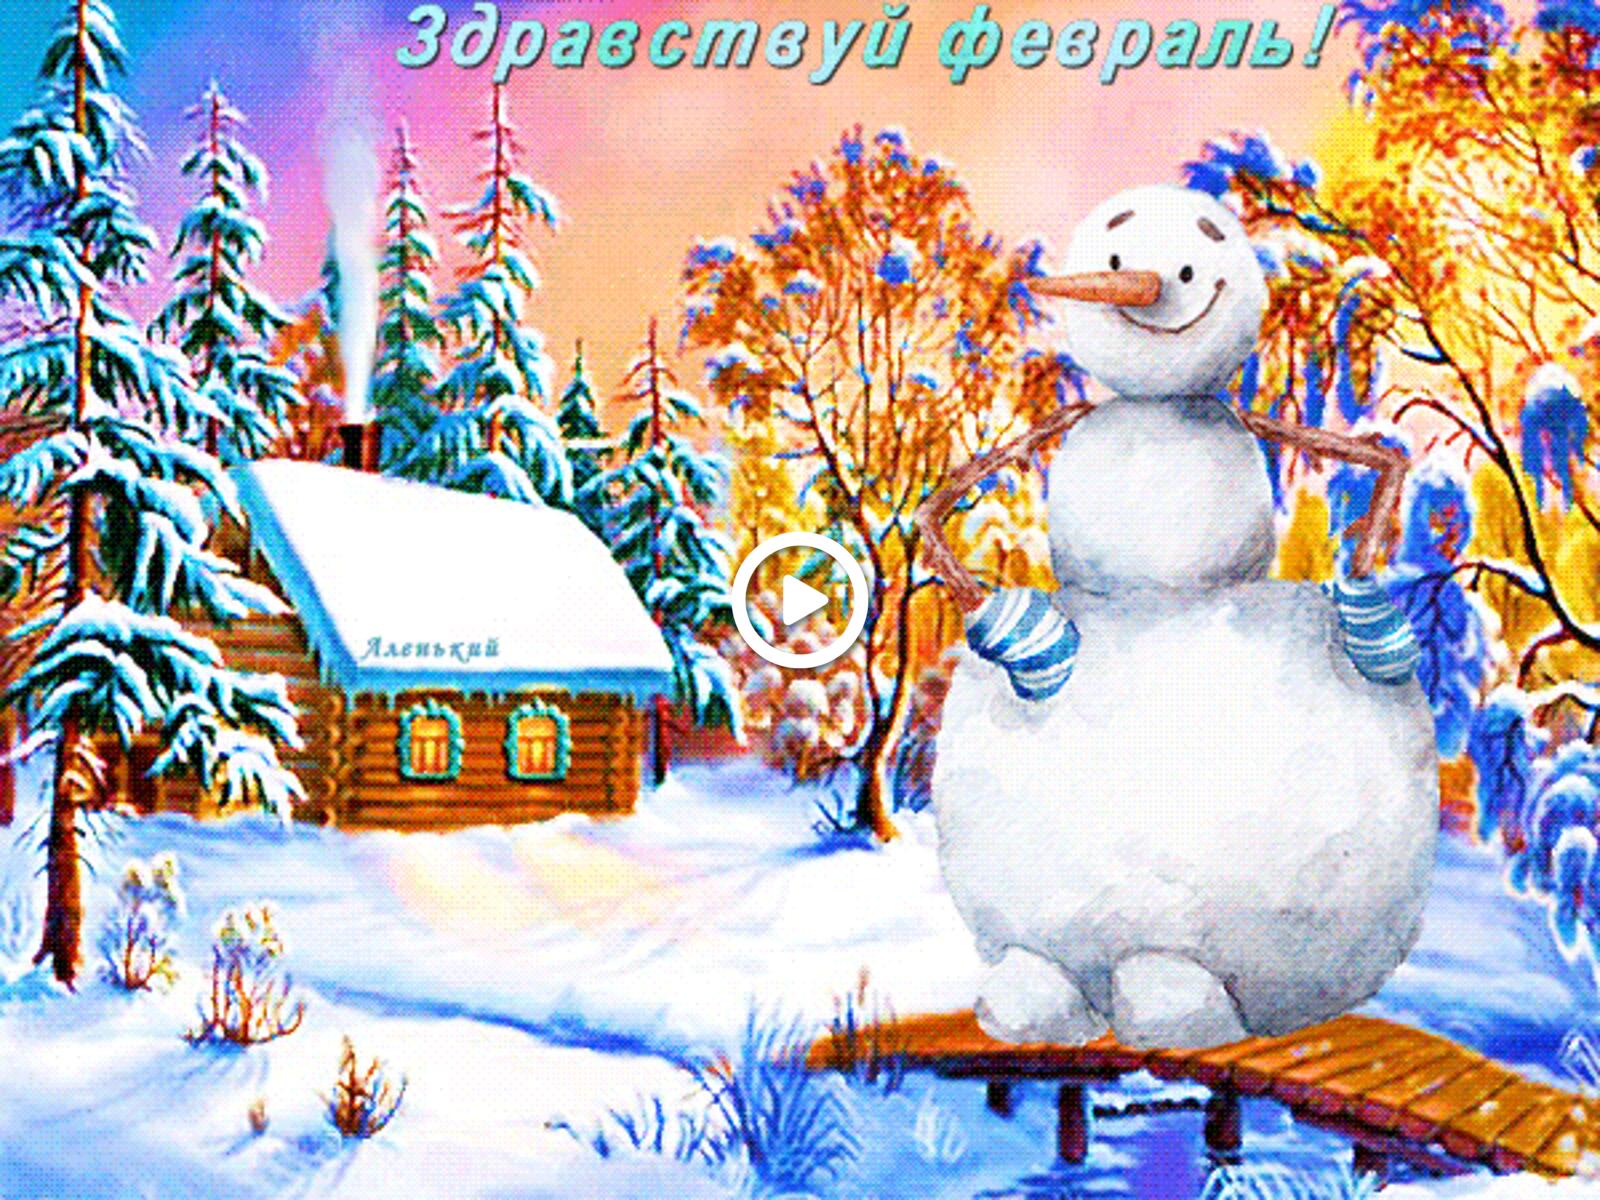 snowman greetings cards for winter winter